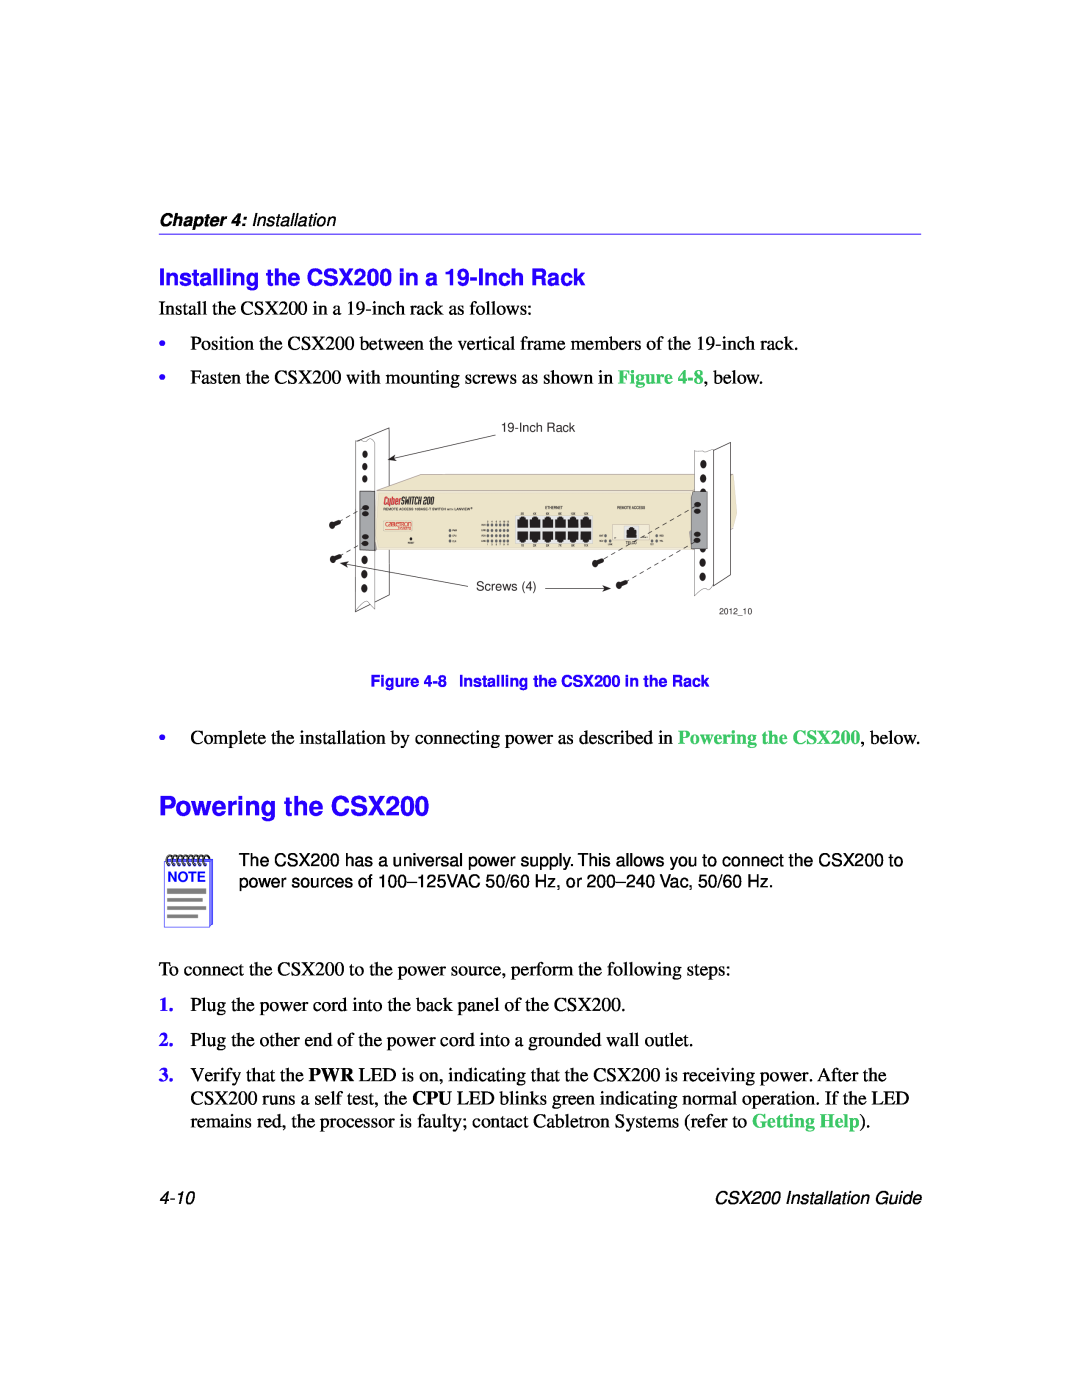 Cabletron Systems manual Powering the CSX200, Installing the CSX200 in a 19-Inch Rack 